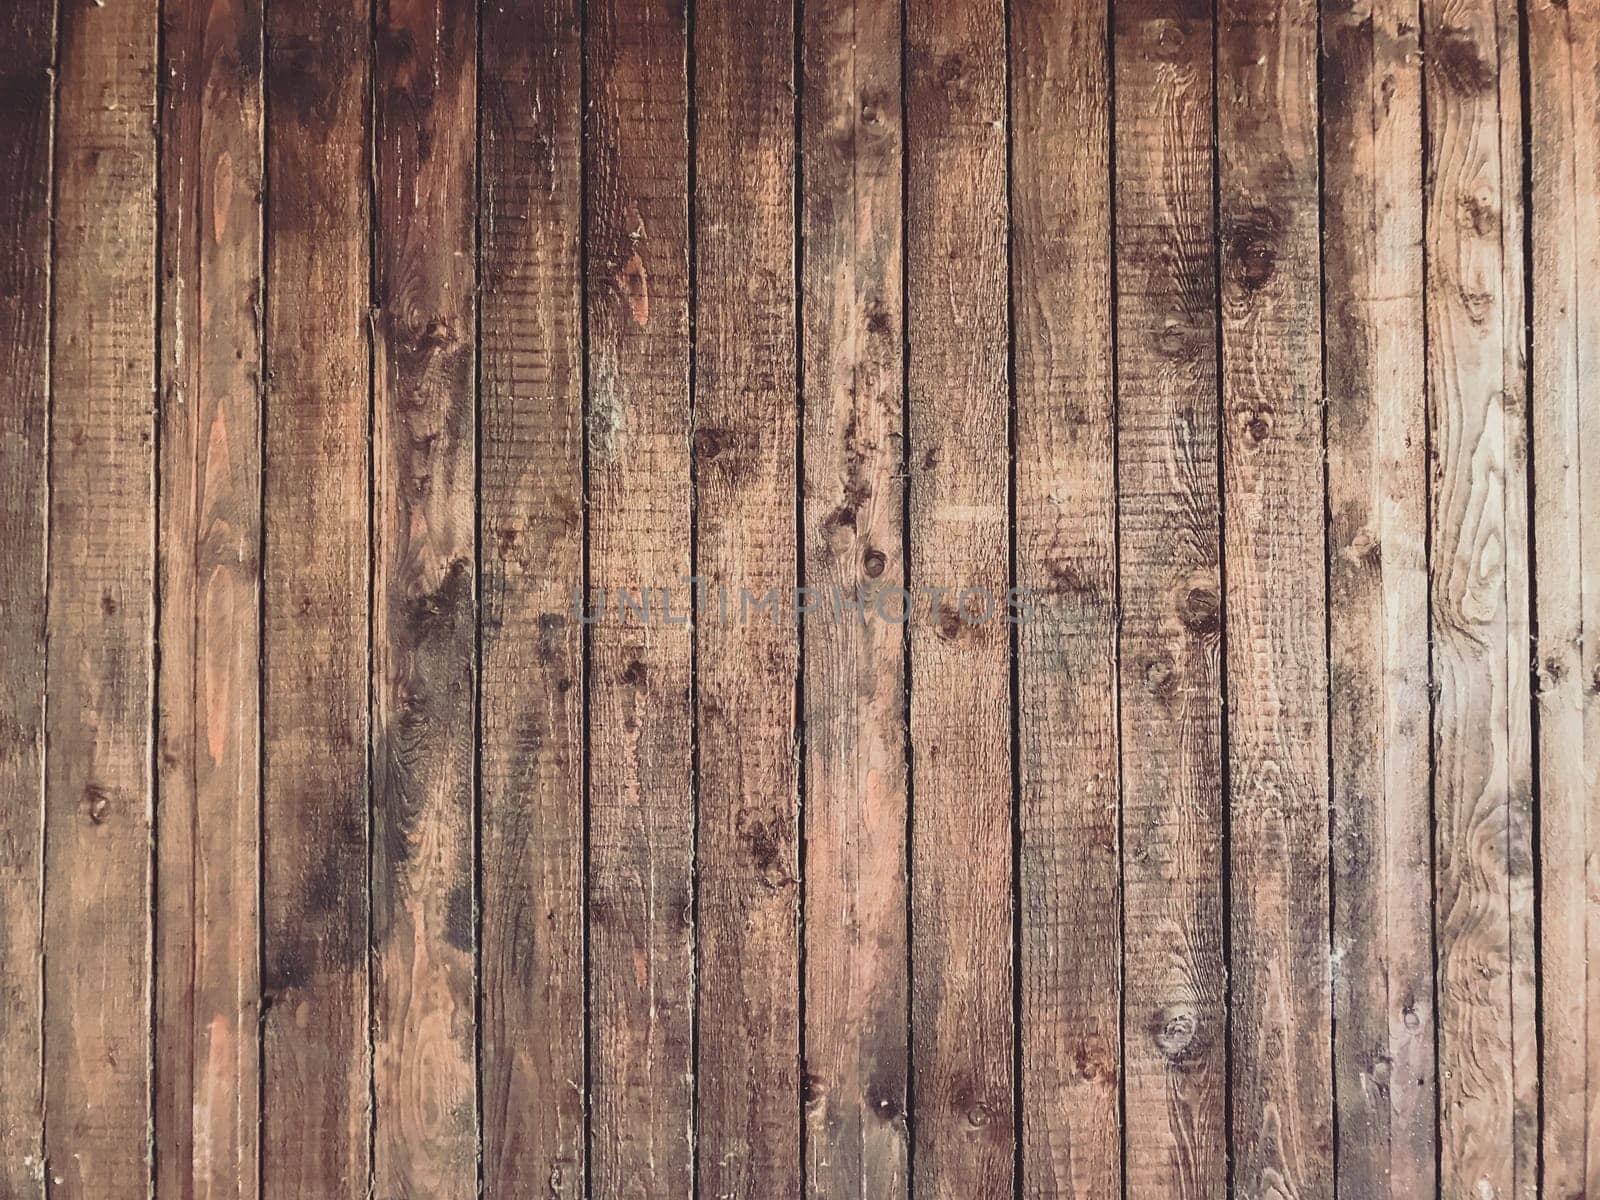 A wooden background with a few small marks on it. The background is brown and has a rustic feel to it